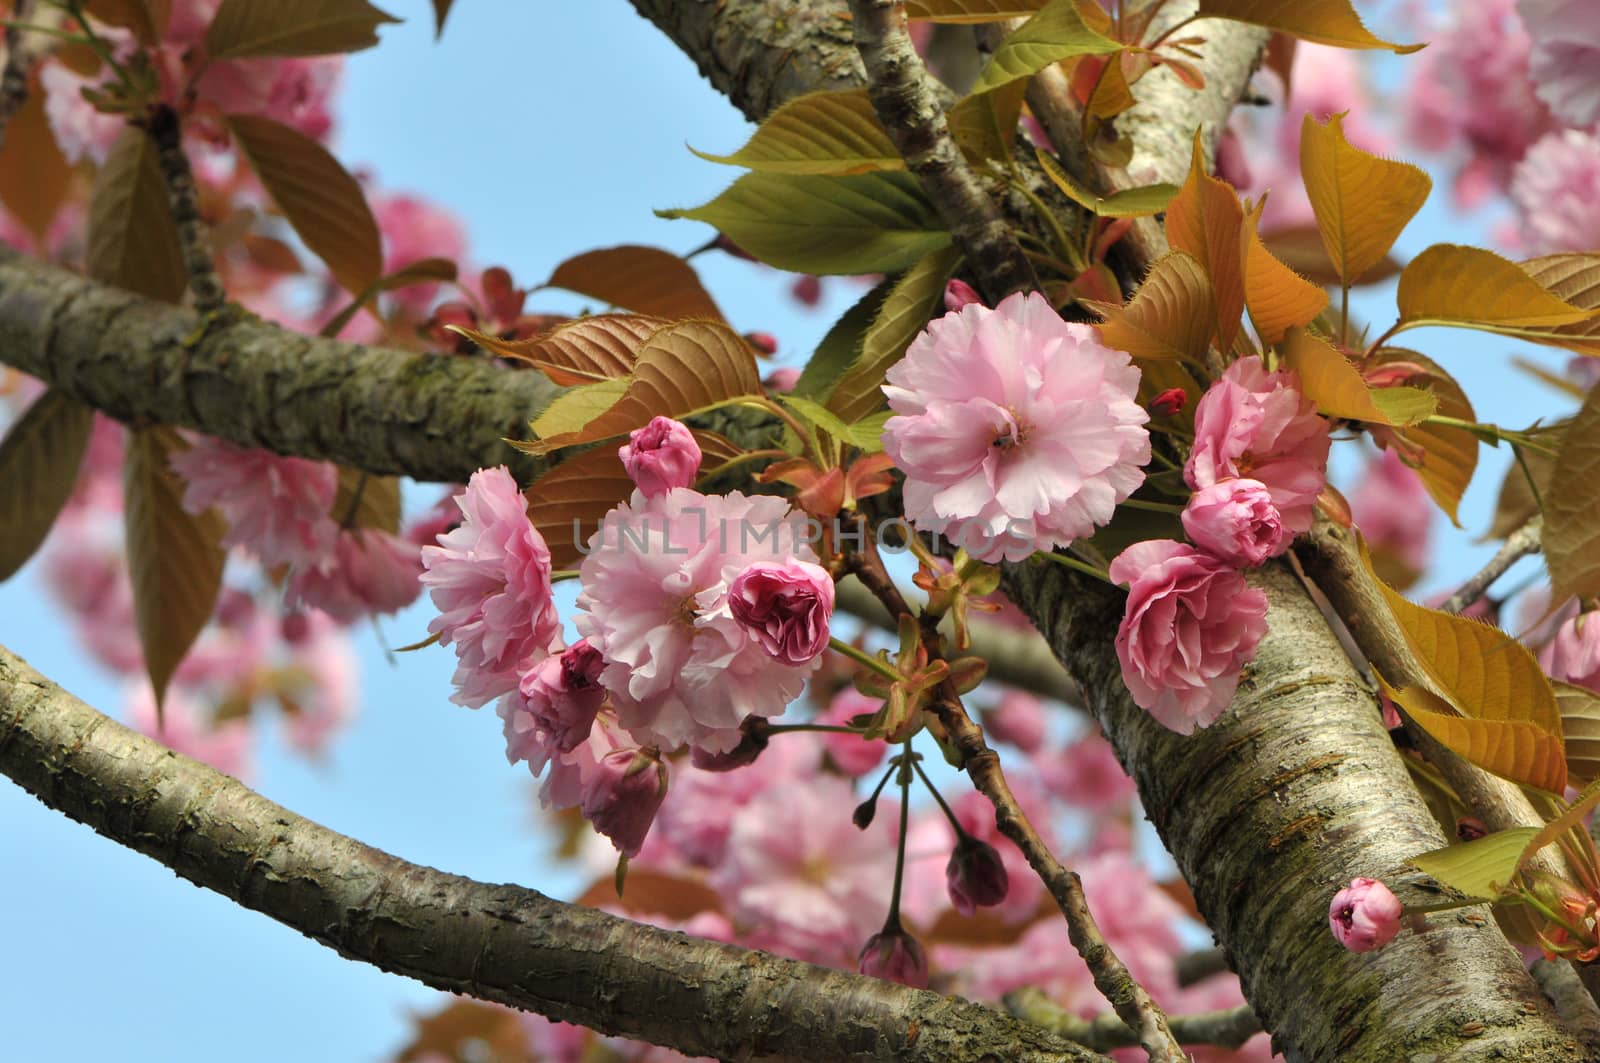 Pink Cherry Blossom along Branchs by shkyo30